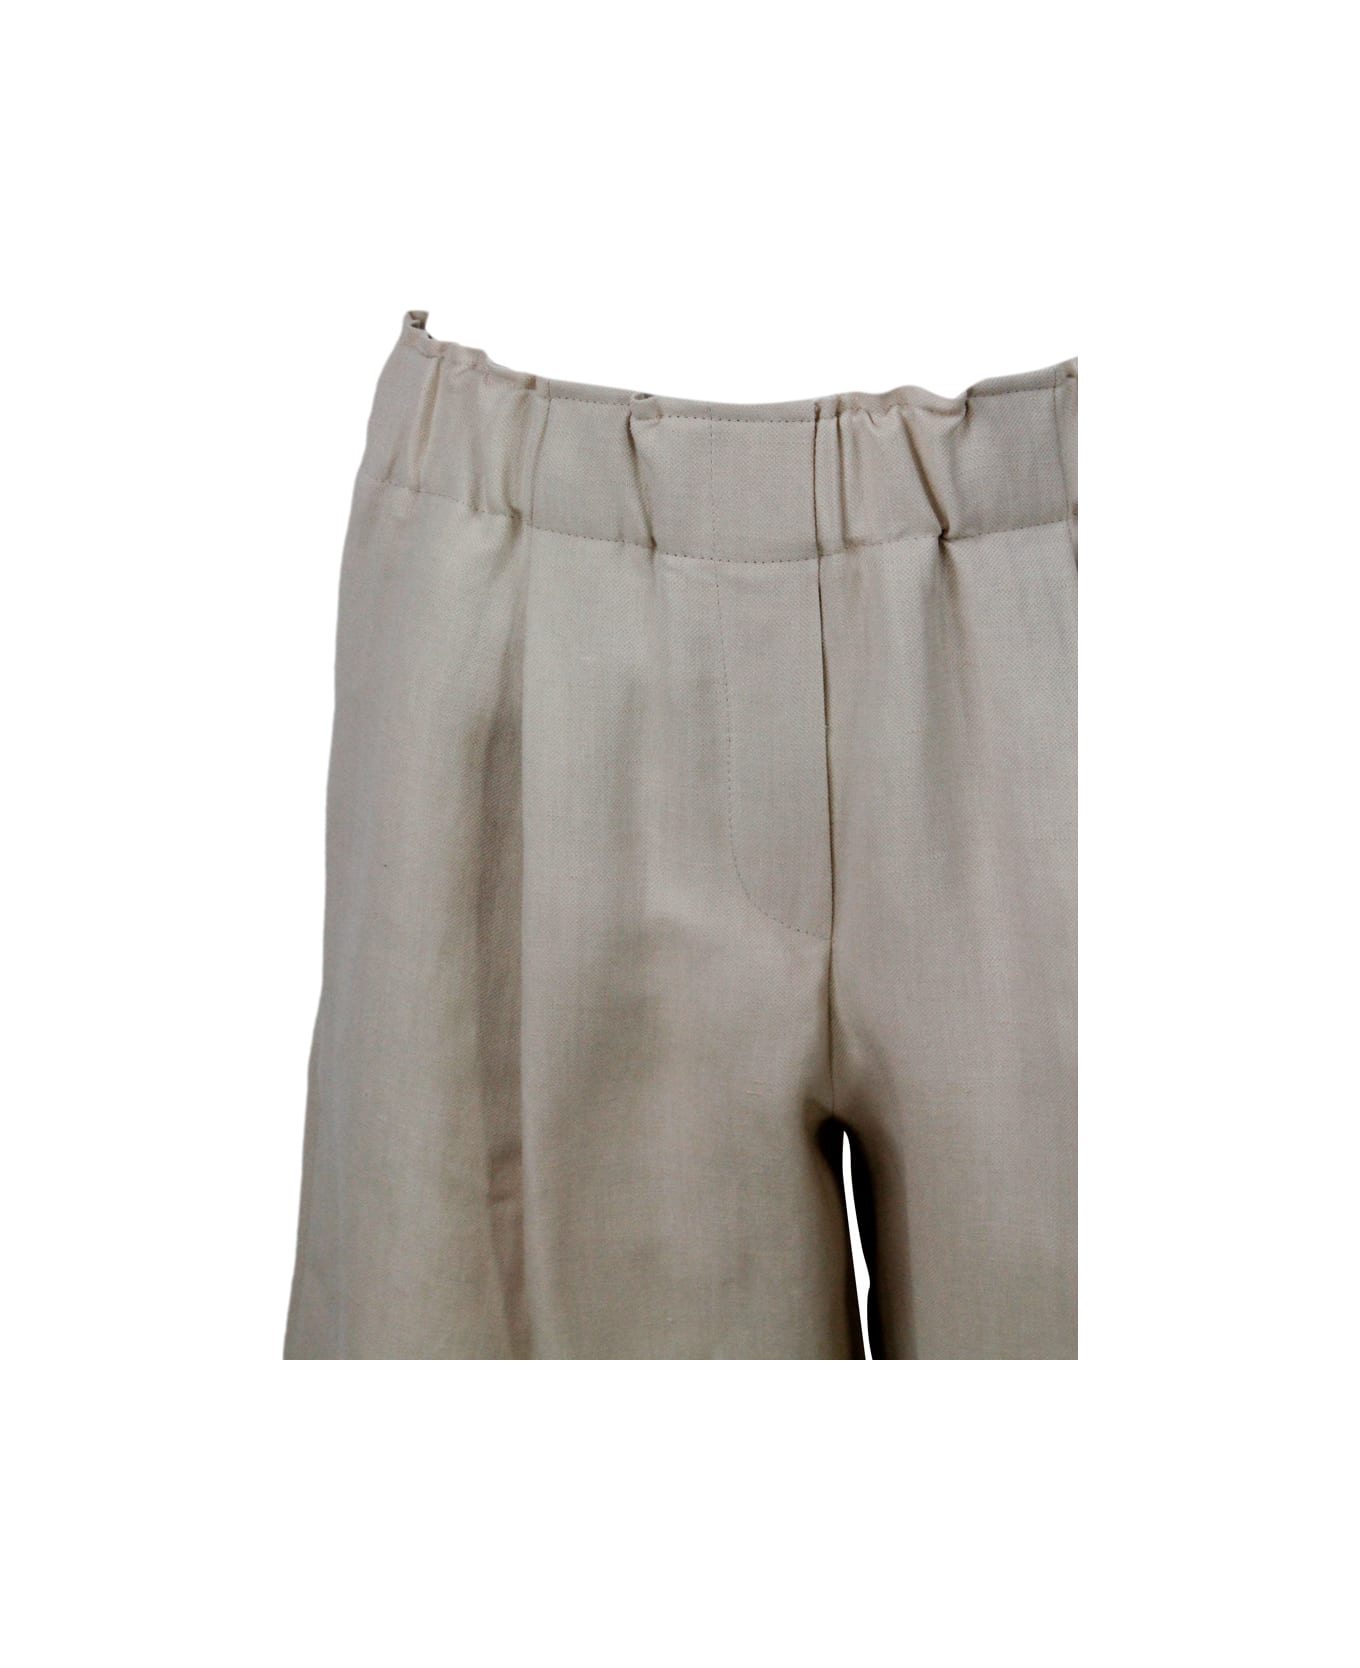 Antonelli Knee-length Bermuda Shorts In Linen Blend With Small Darts And Elasticated Waist - Beige ショートパンツ